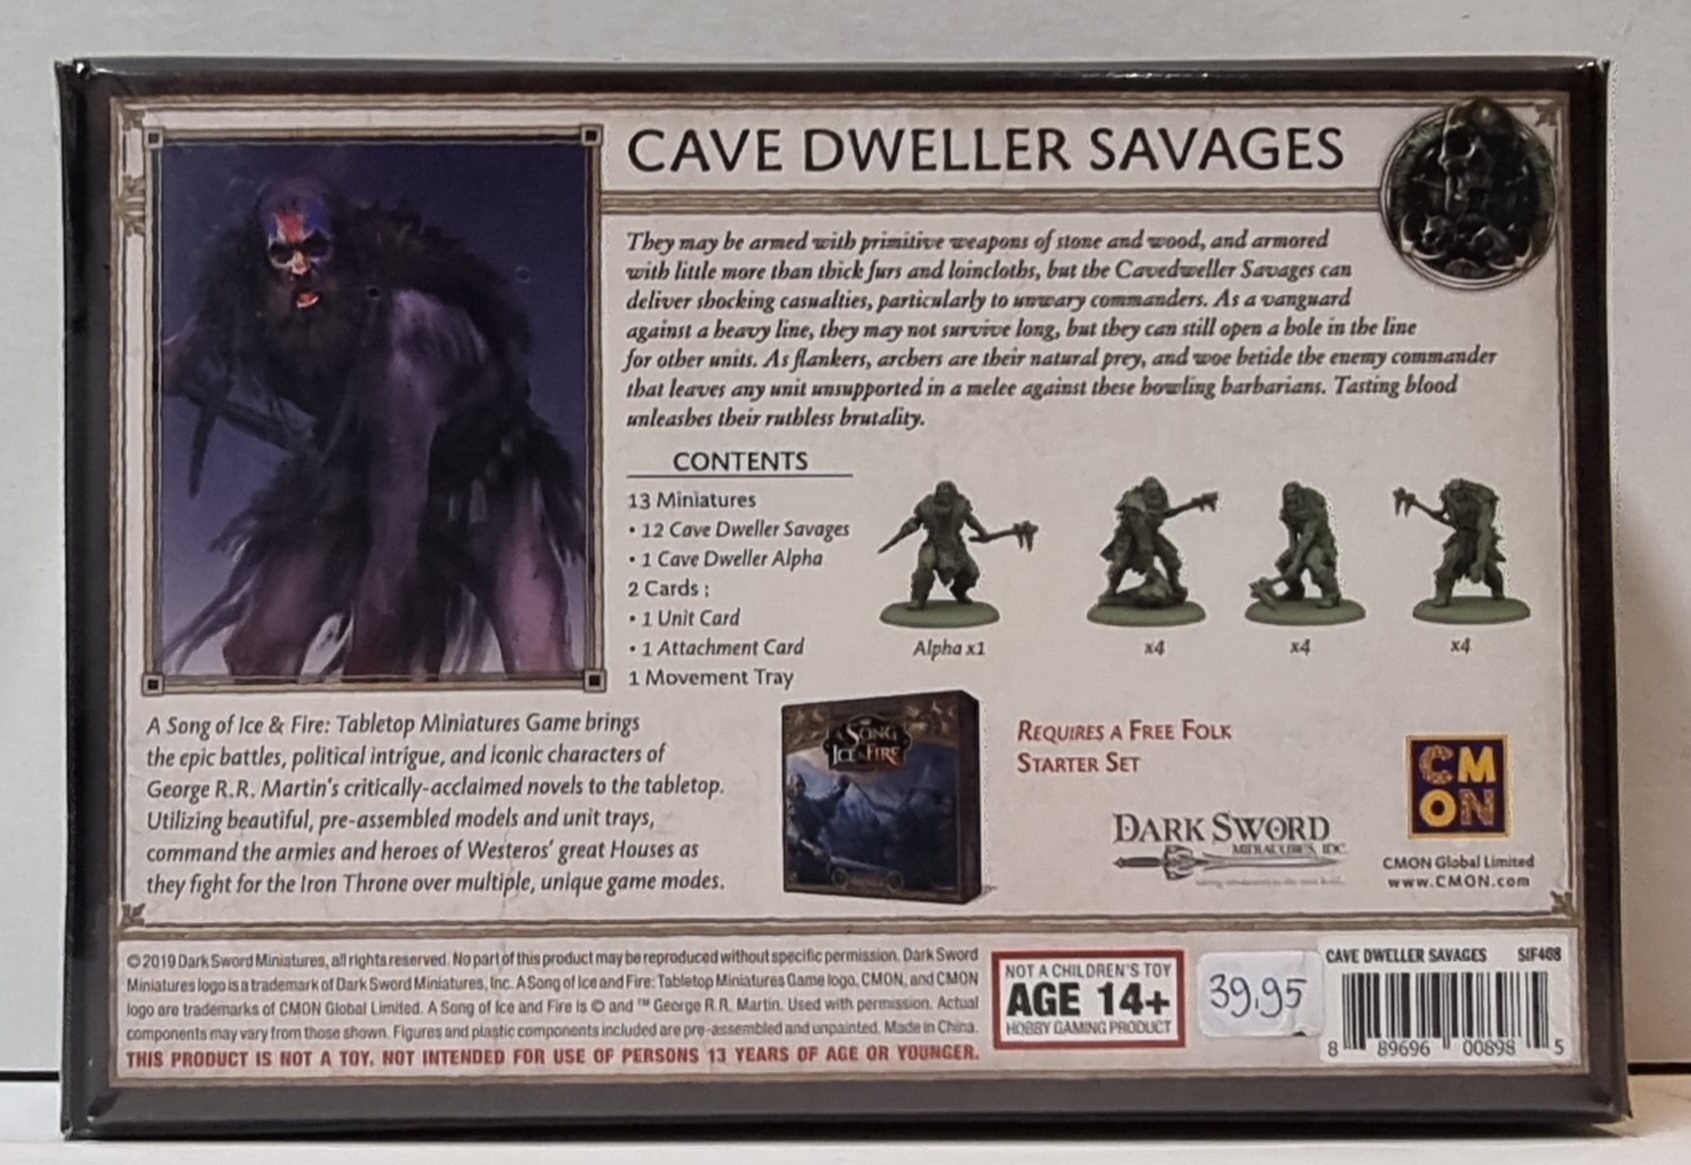 A Song of Ice & Fire SIF408 Cave Dweller Savages cmon